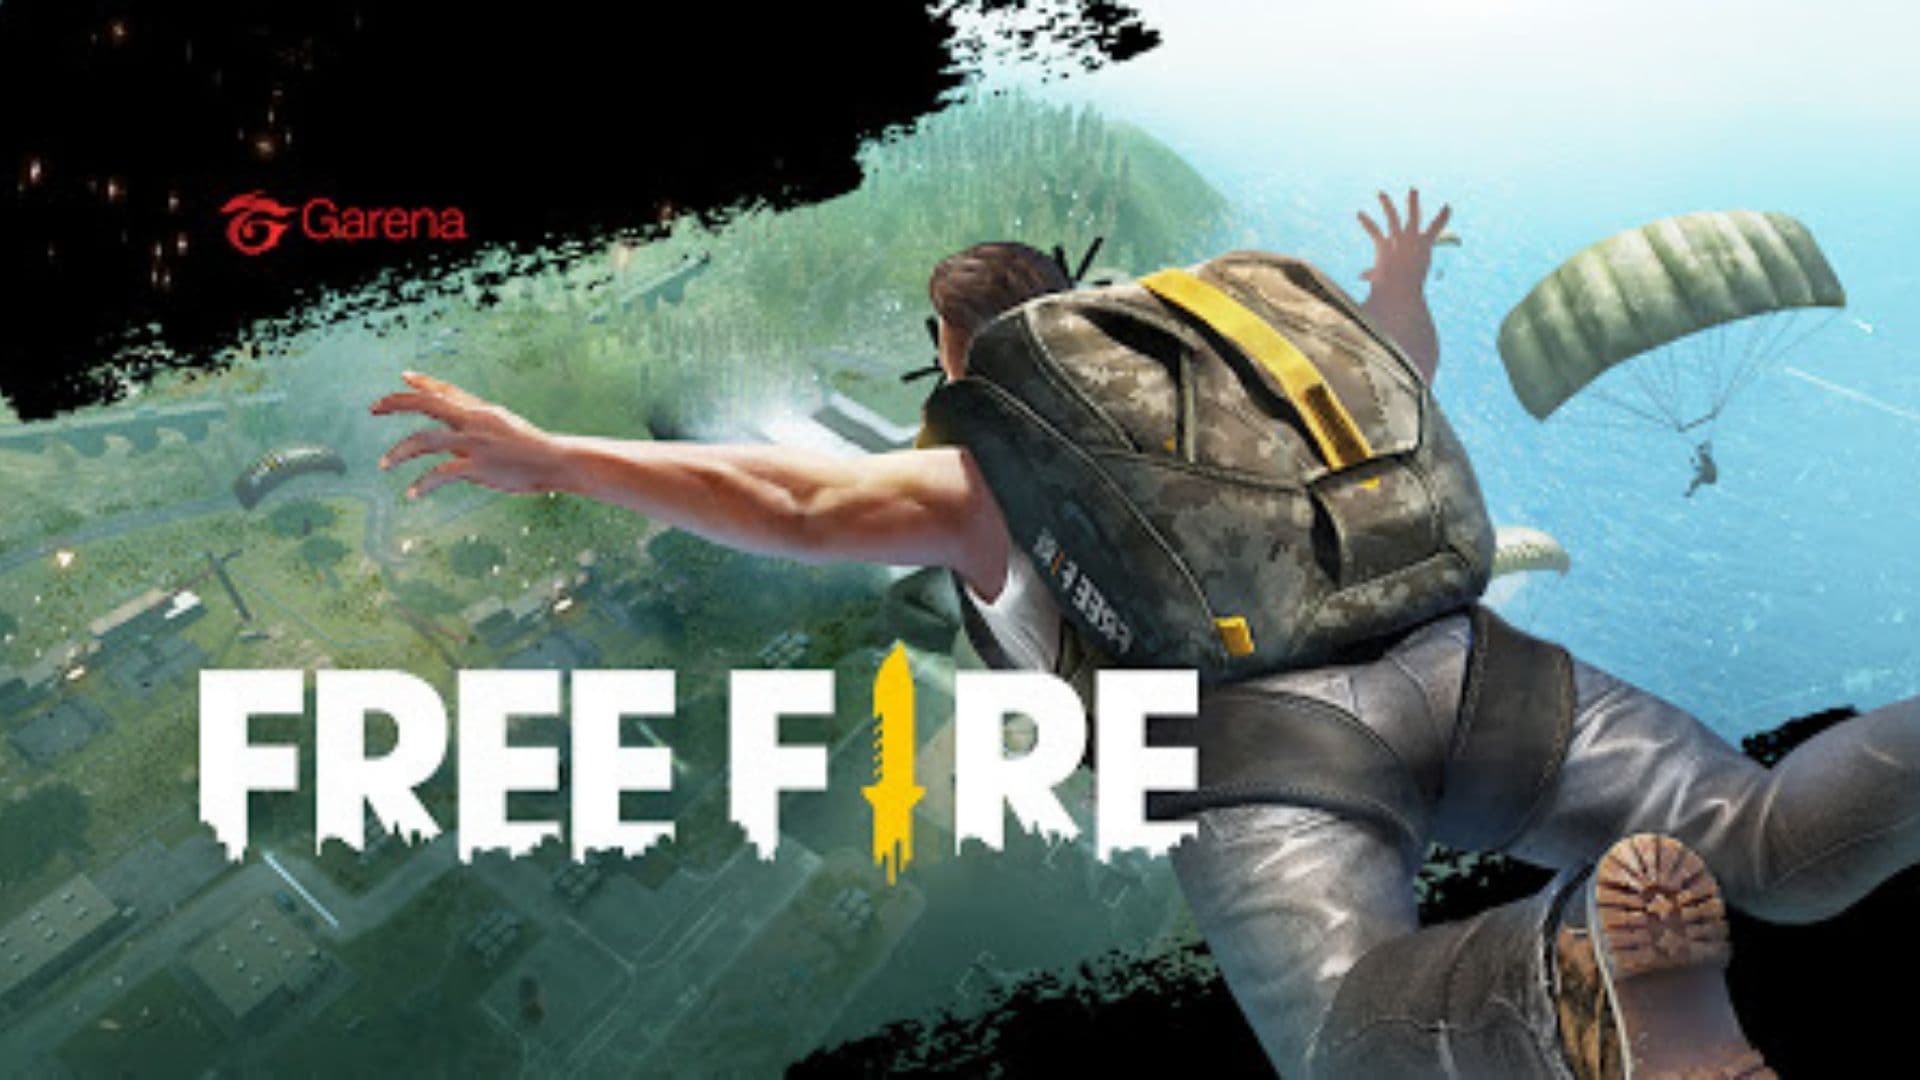 gerena free fire